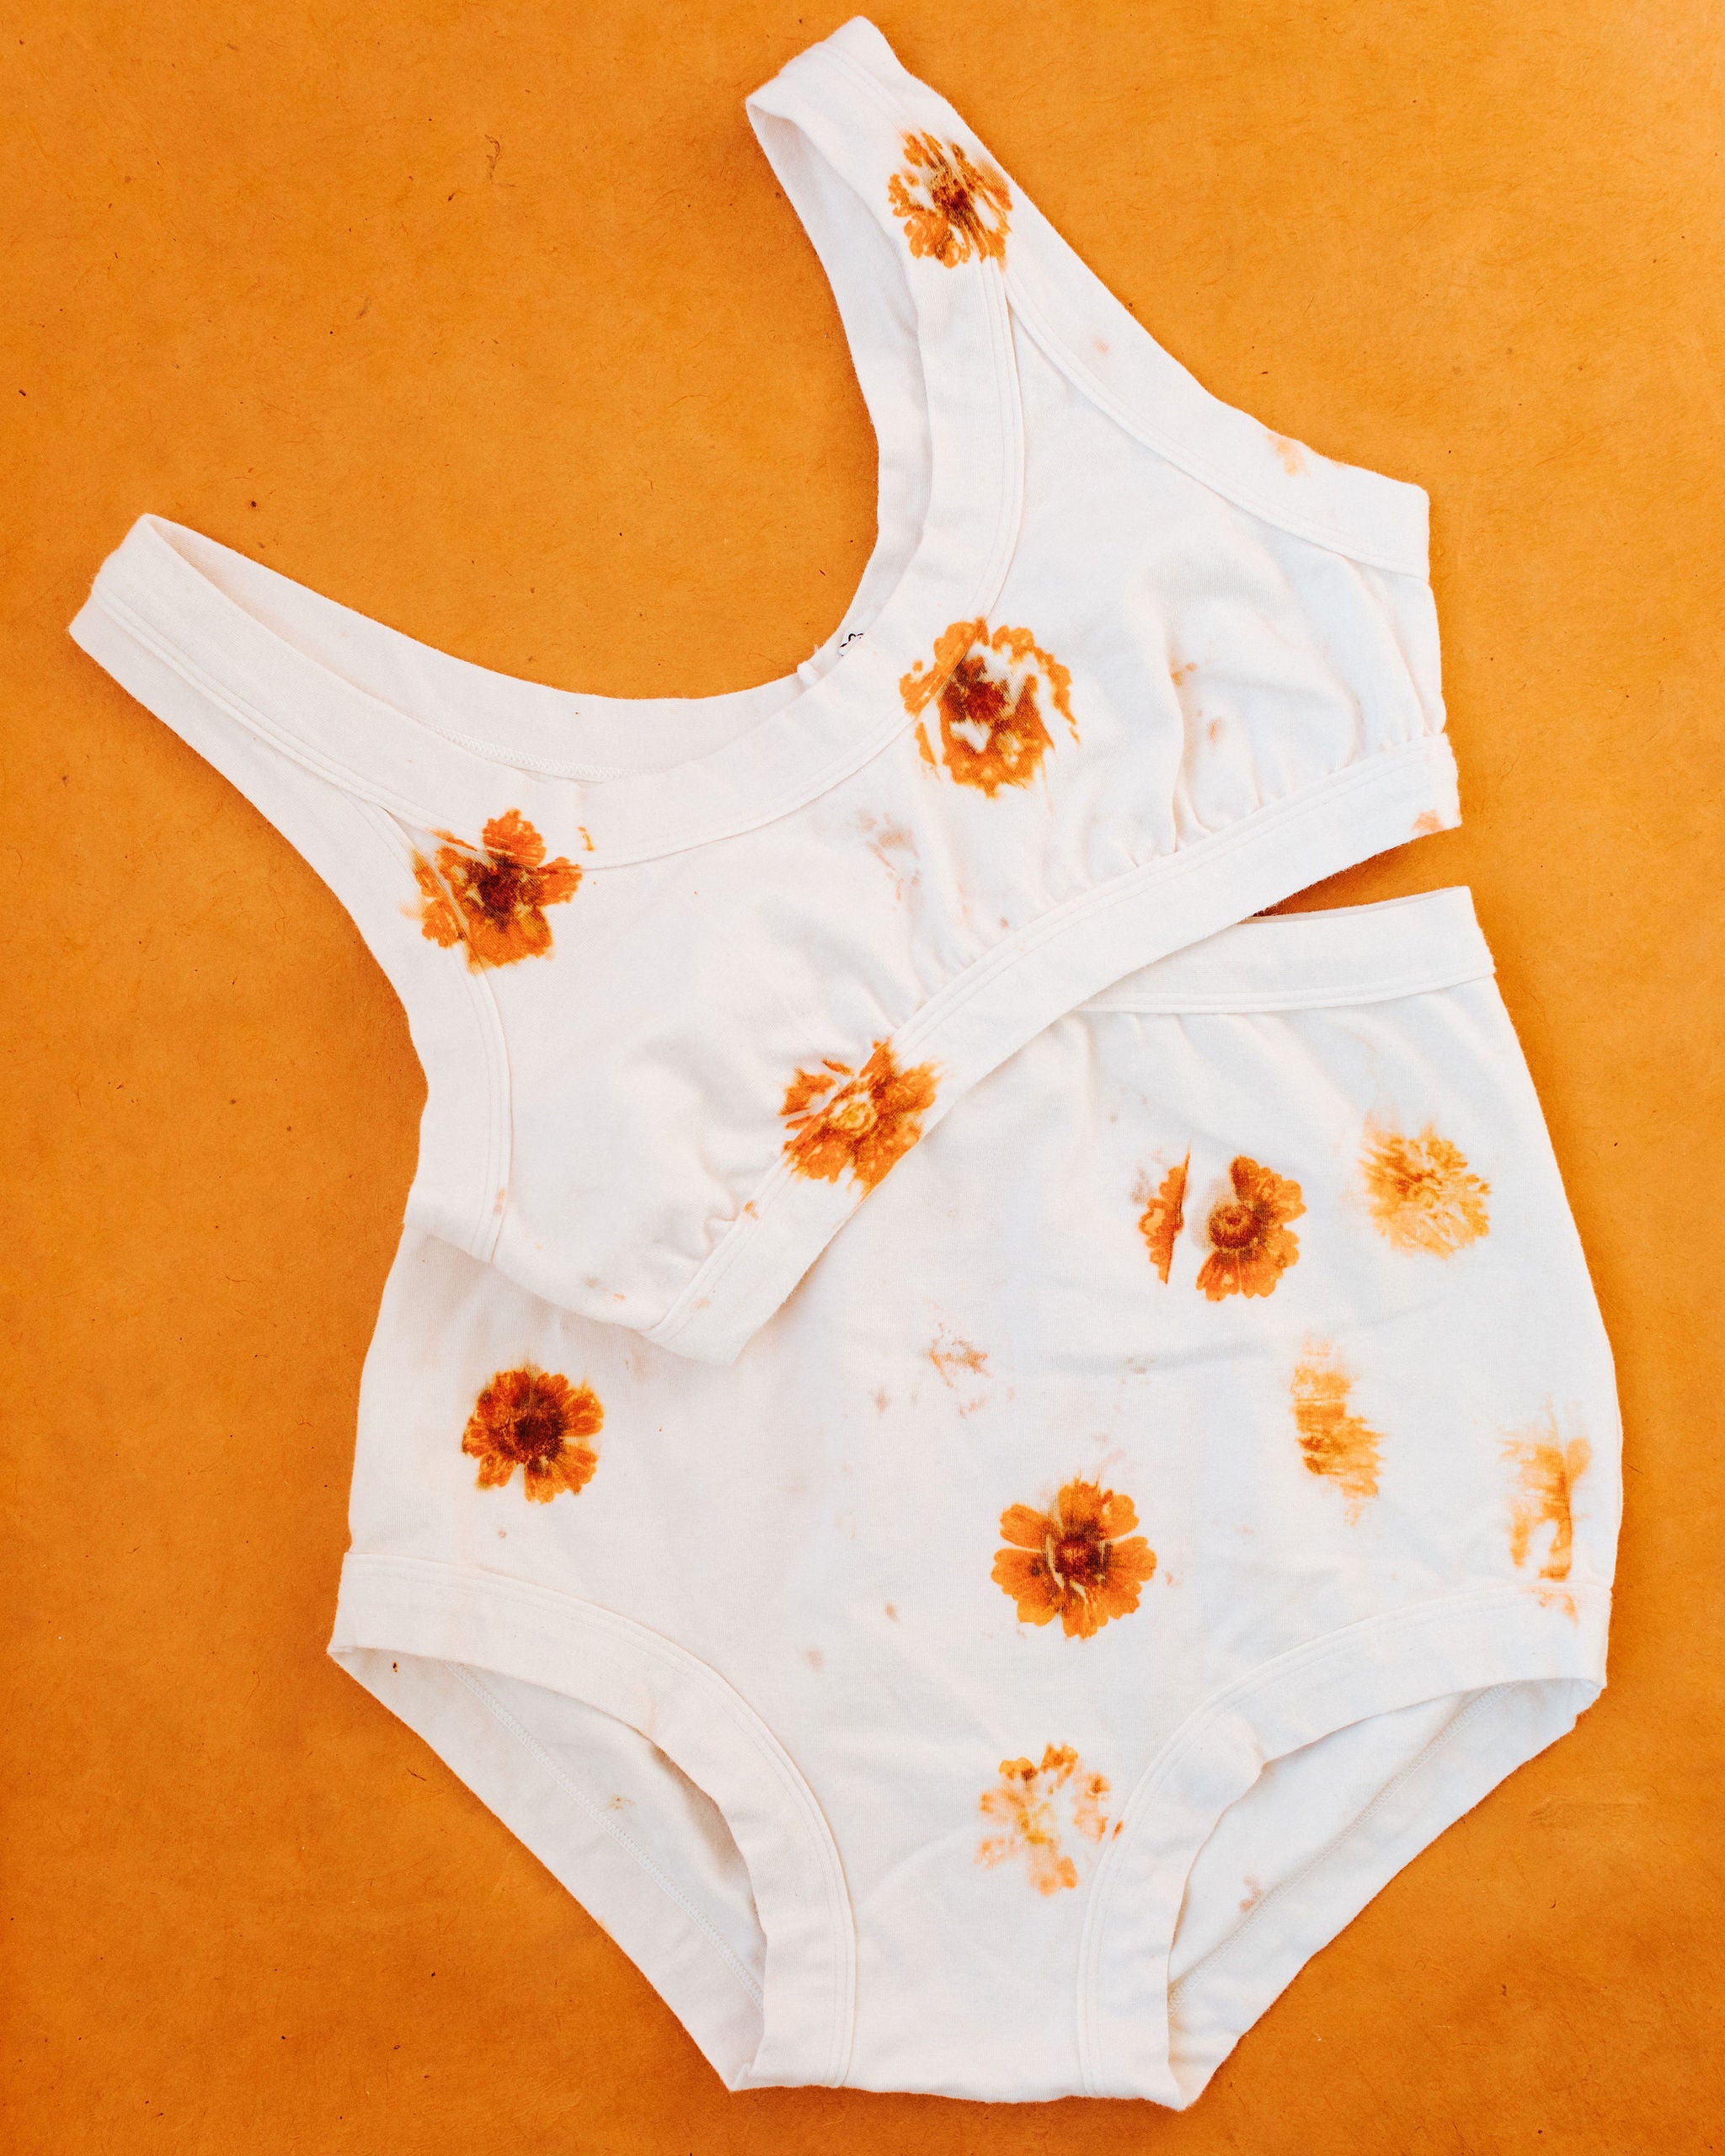 Flat lay on an orange surface of Thunderpants Sky Rise style underwear and Bralette in the Limited Edition Flower Press Botanical Dye - flowers pressed on the underwear to create a print.